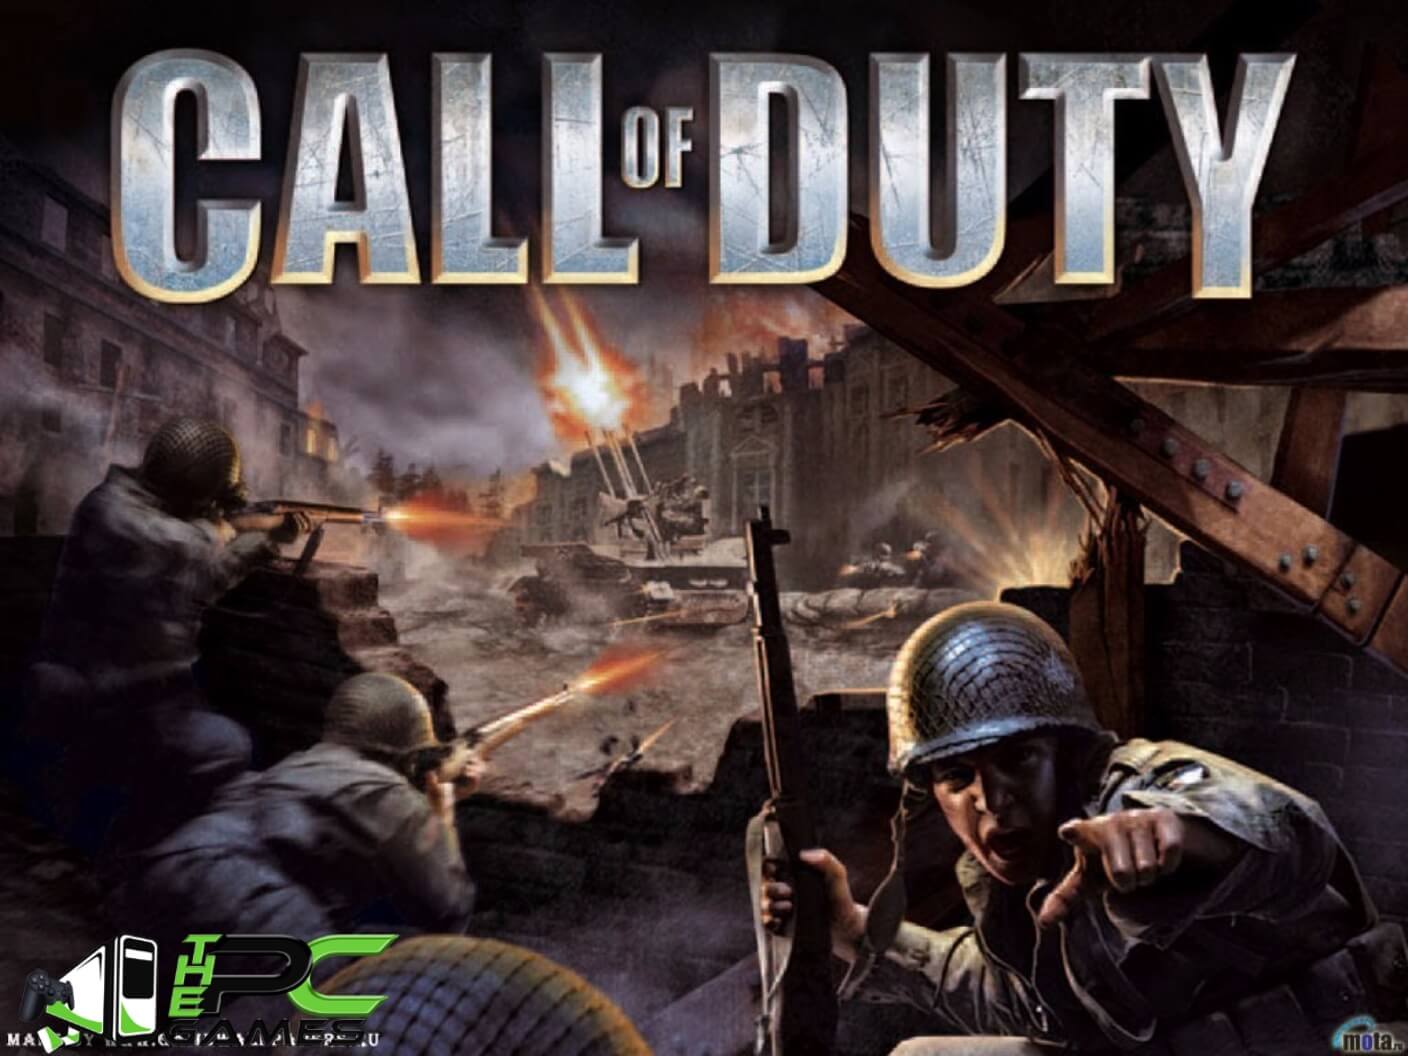 Call Of Duty United Offensive Pc Game Free Download Torrent